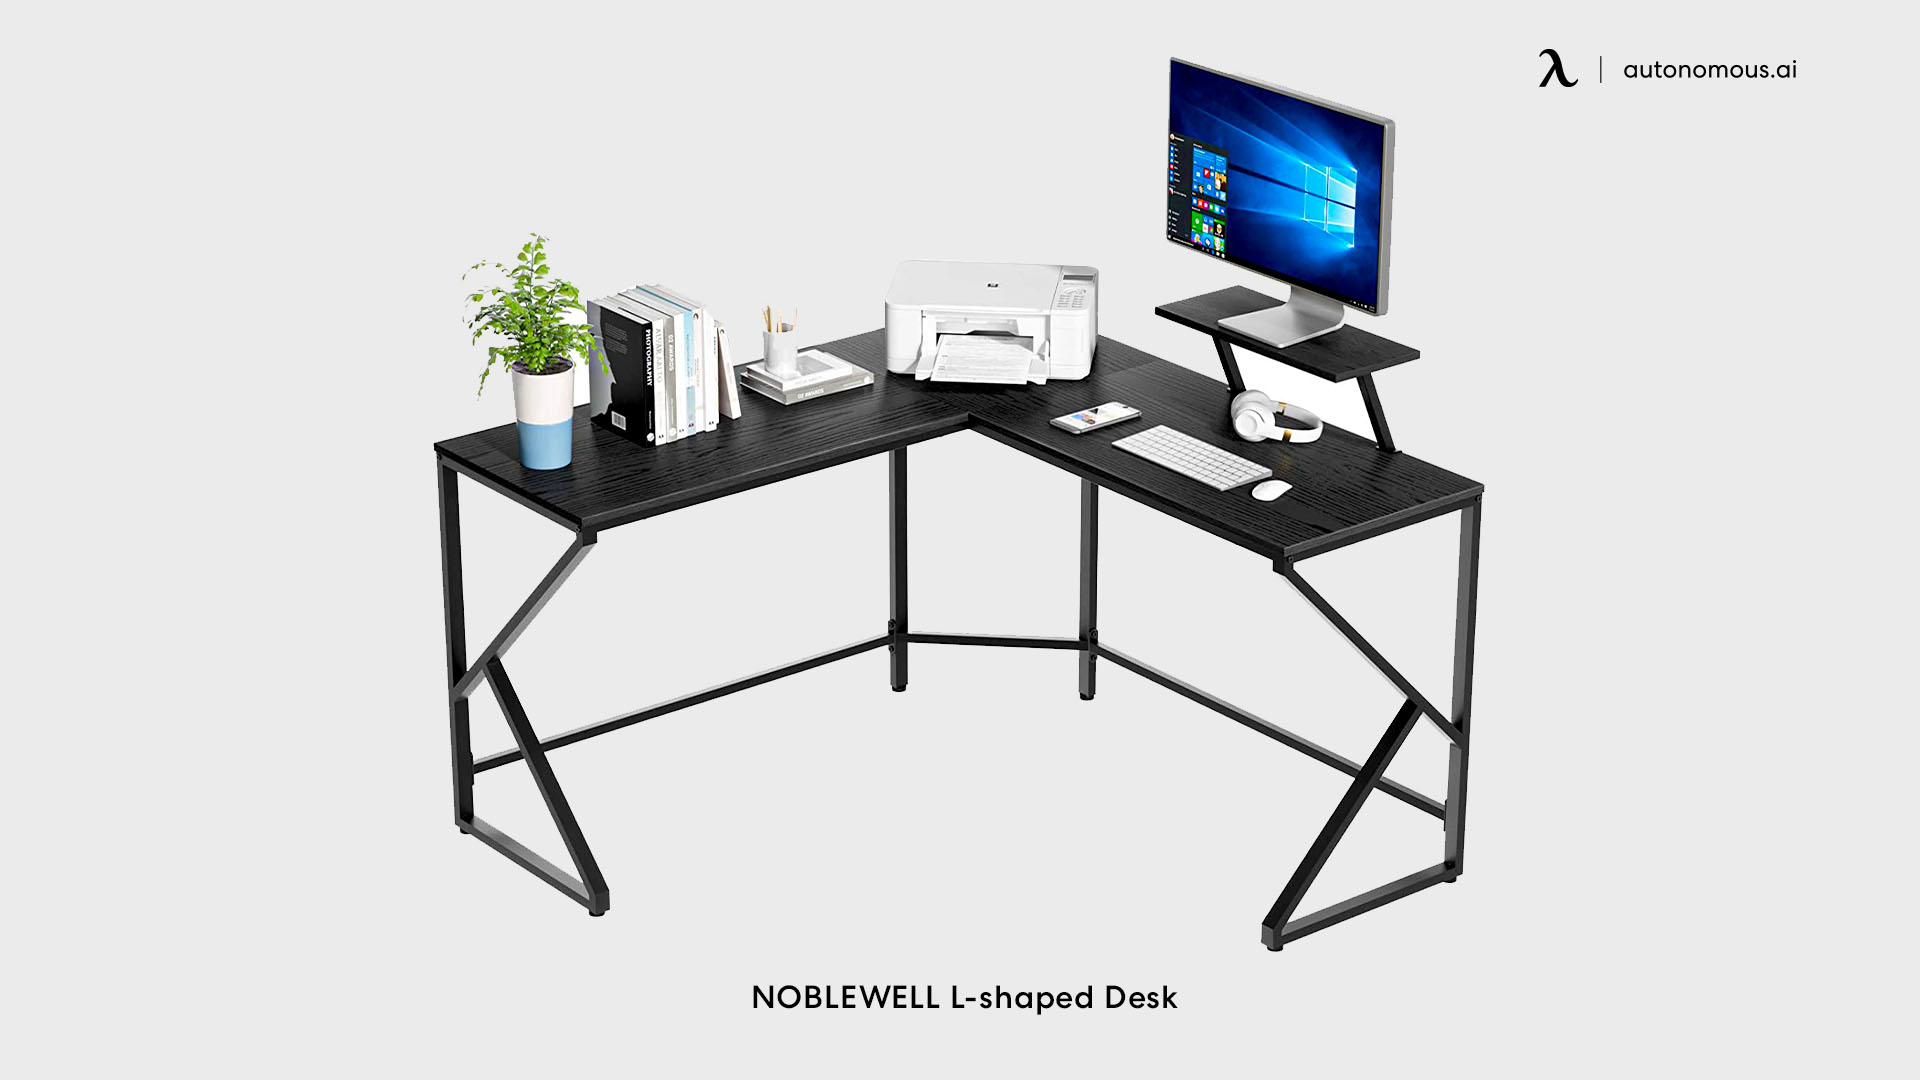 NOBLEWELL L-shaped Desk with Attached Keyboards